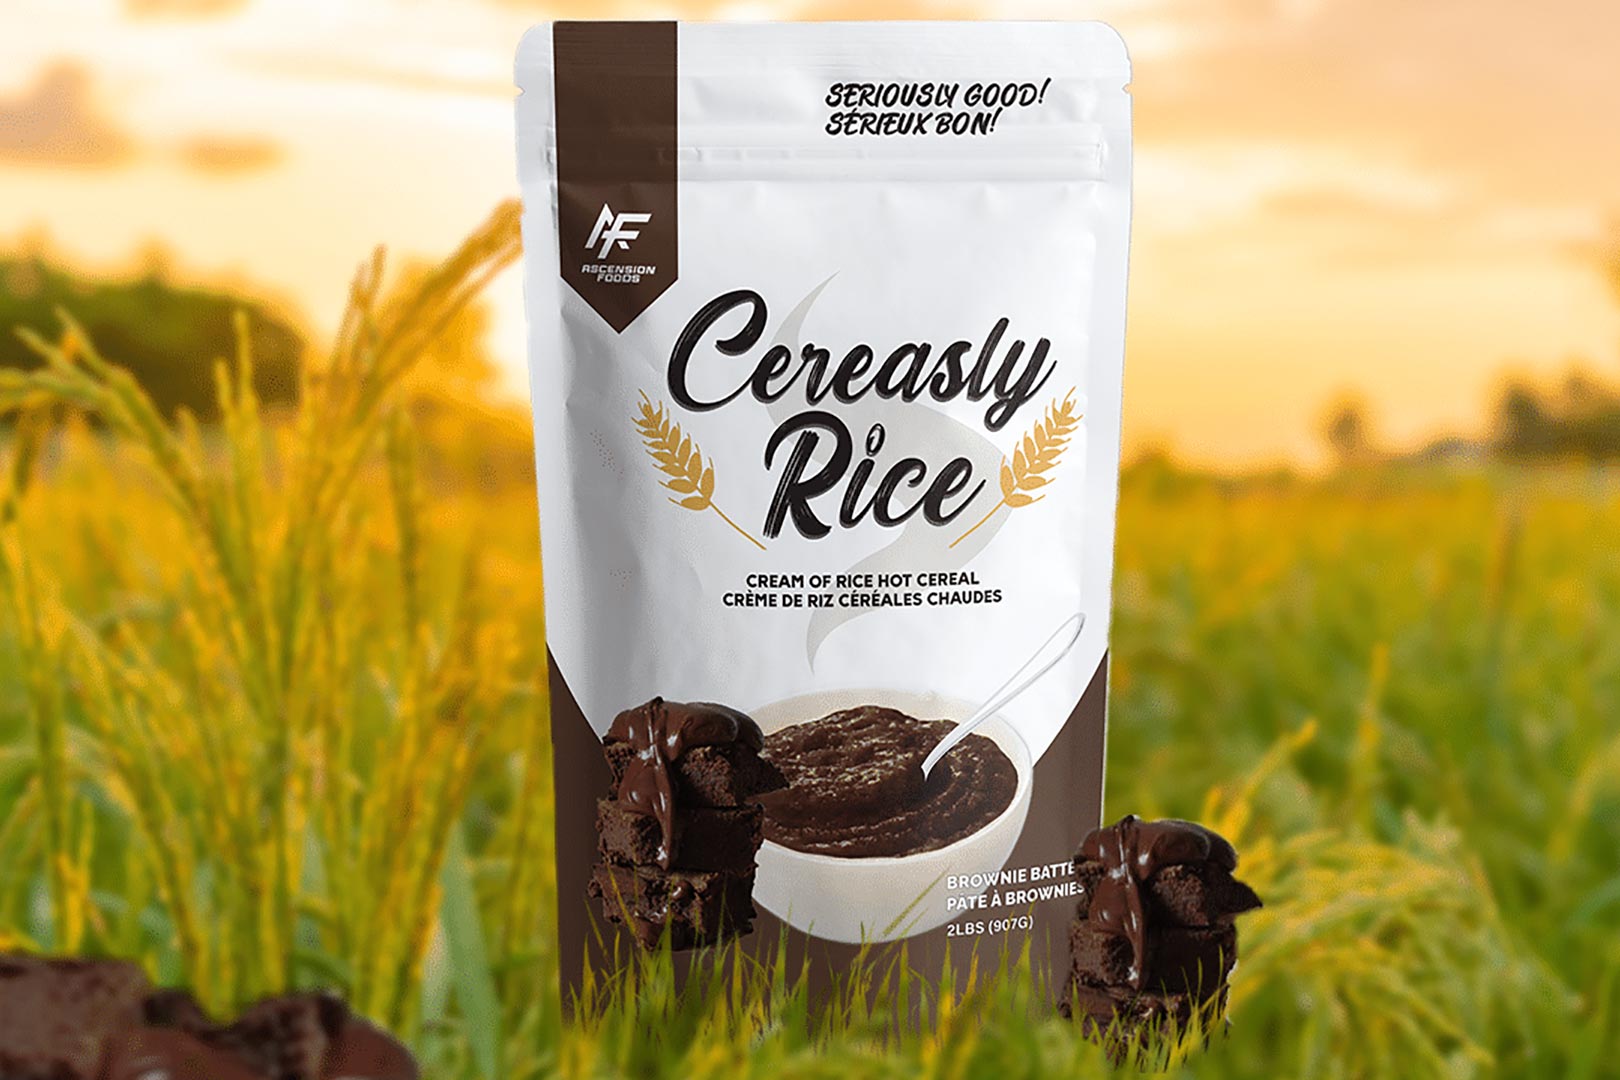 Ascension Foods Relaunches Cereasly Rice On Its Website